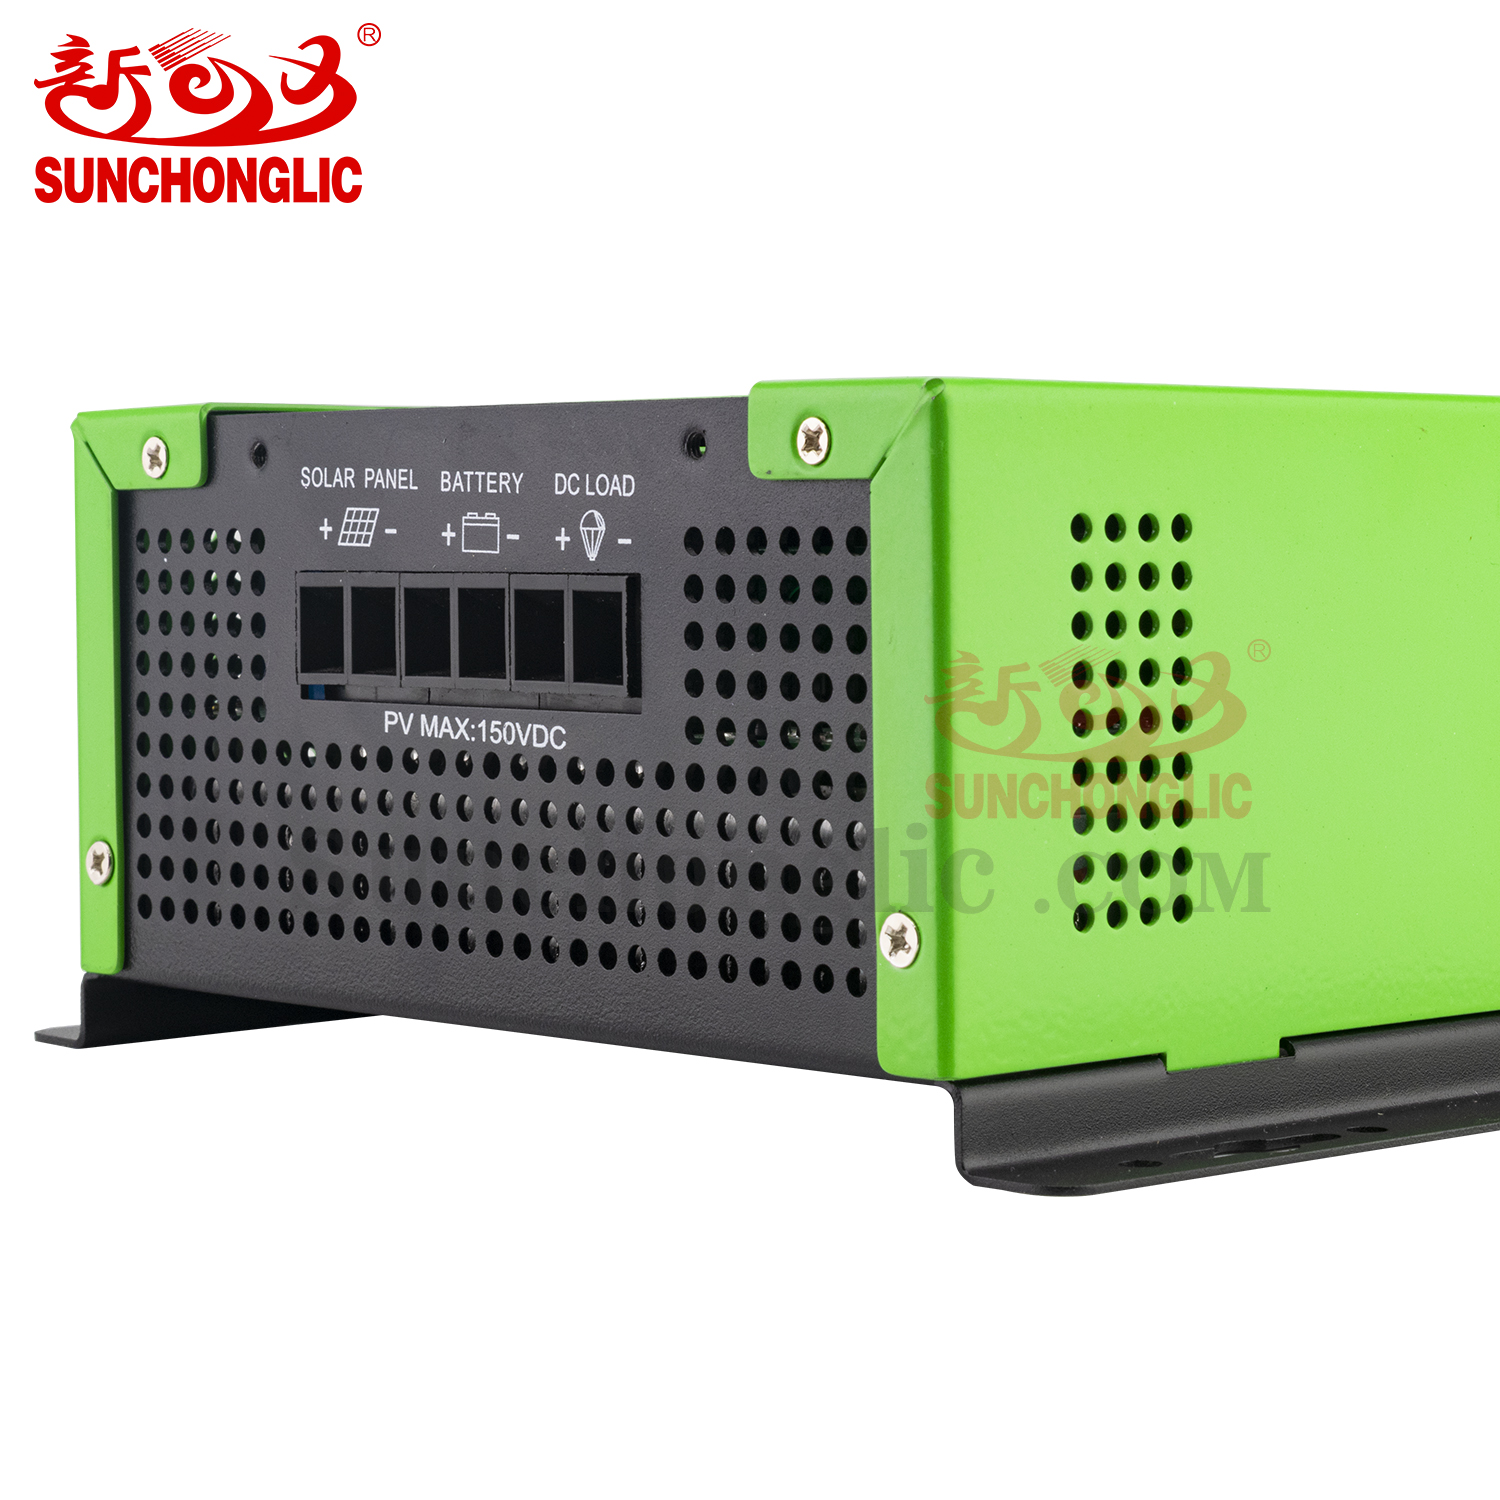 MPPT Solar Charge Controller - FT-MP-30A